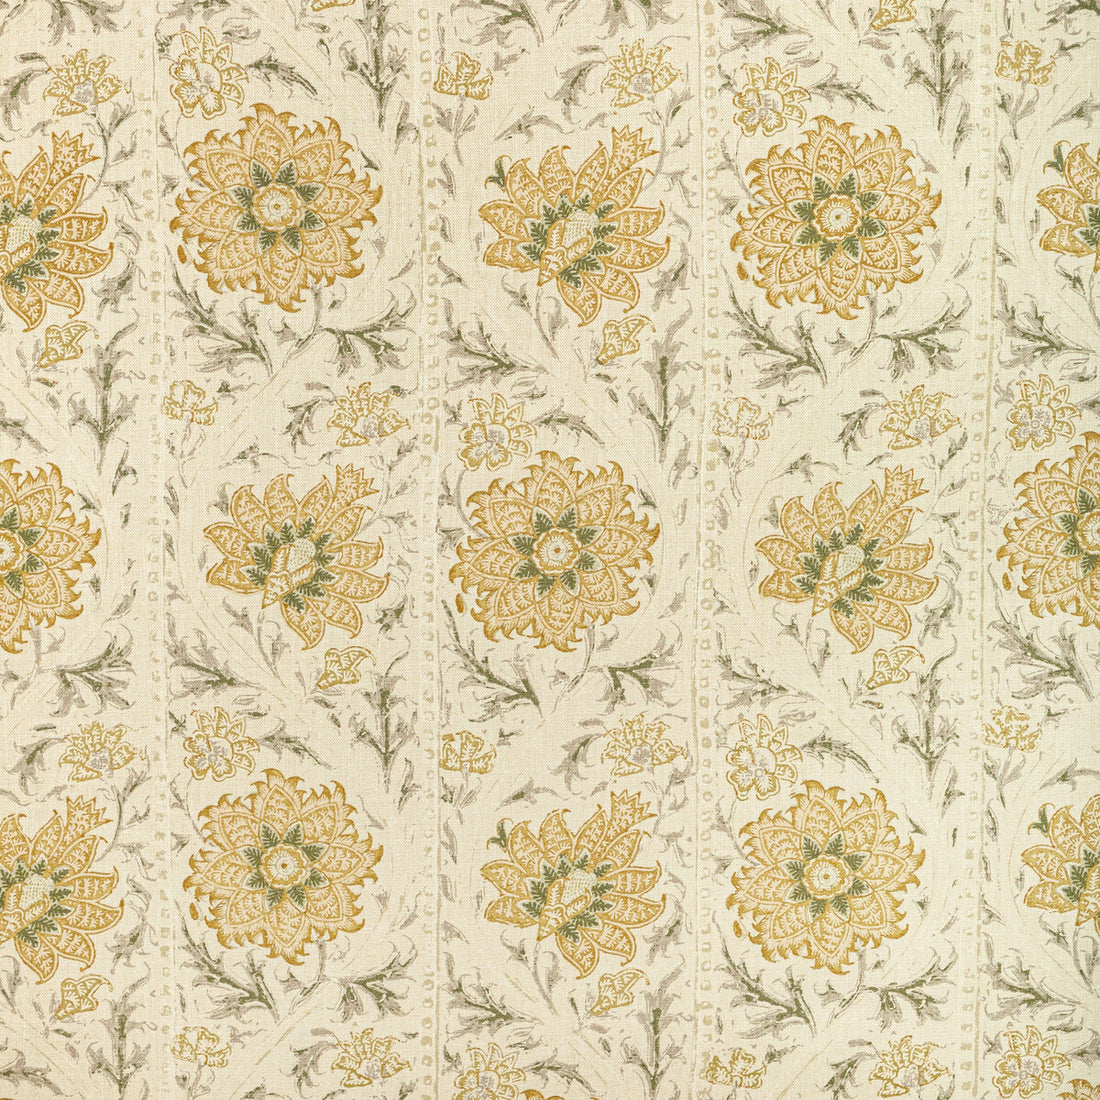 Calico Vine fabric in marigold color - pattern 2022102.411.0 - by Lee Jofa in the Sarah Bartholomew collection